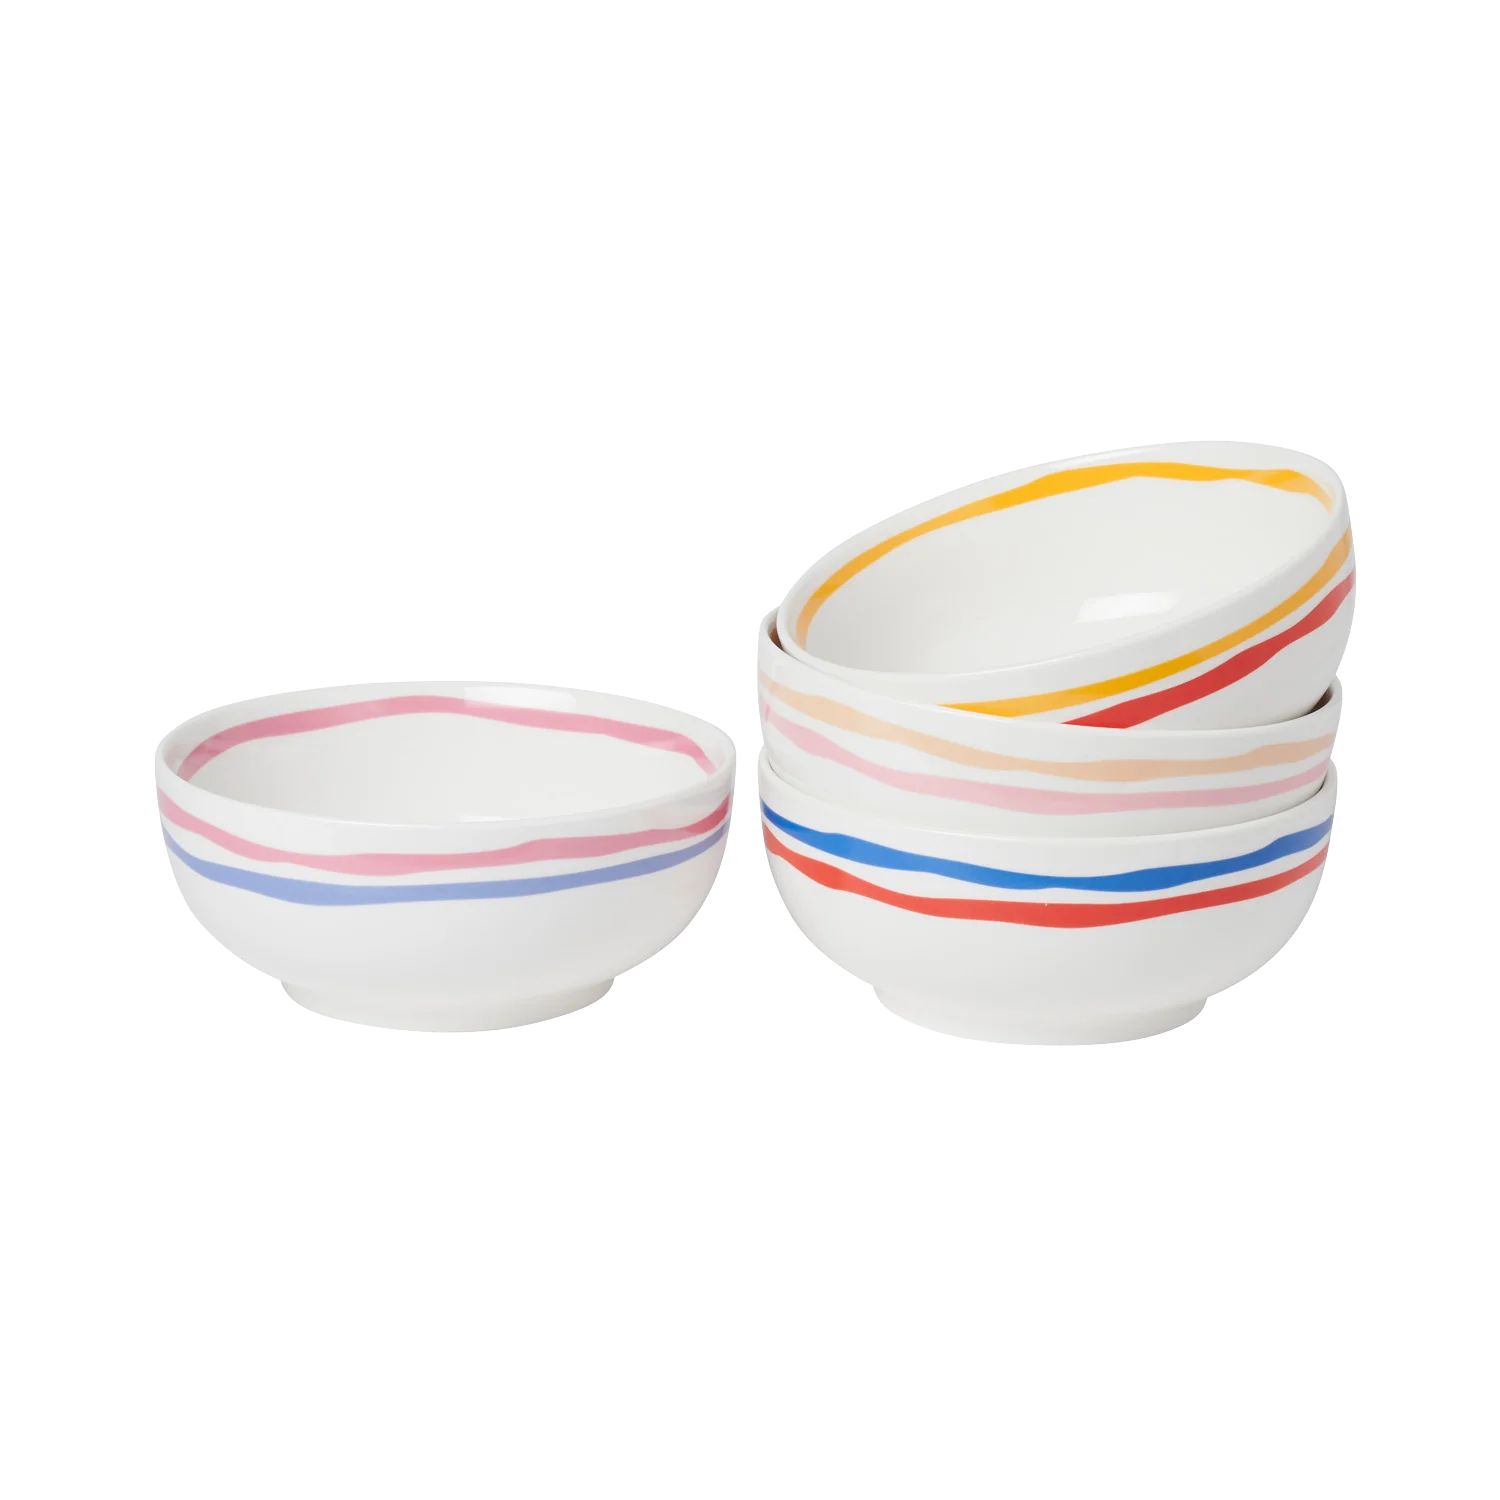 Seafood Bowl Set - Set of 4 | In the Roundhouse